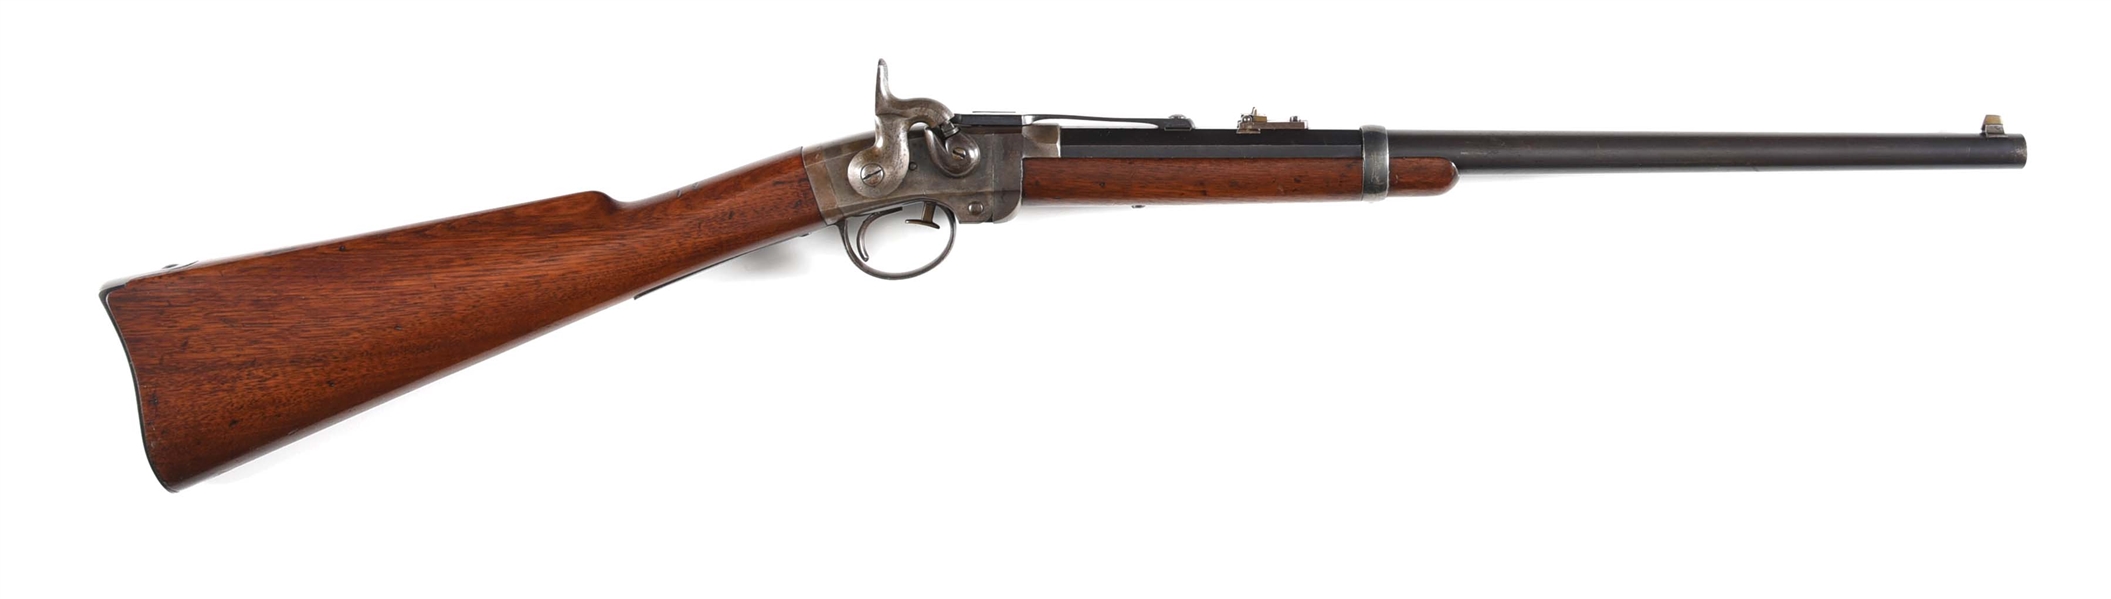 (A) SMITH PERCUSSION CARBINE MARKED POULTNEY & TRIMBLE OF BALTIMORE.